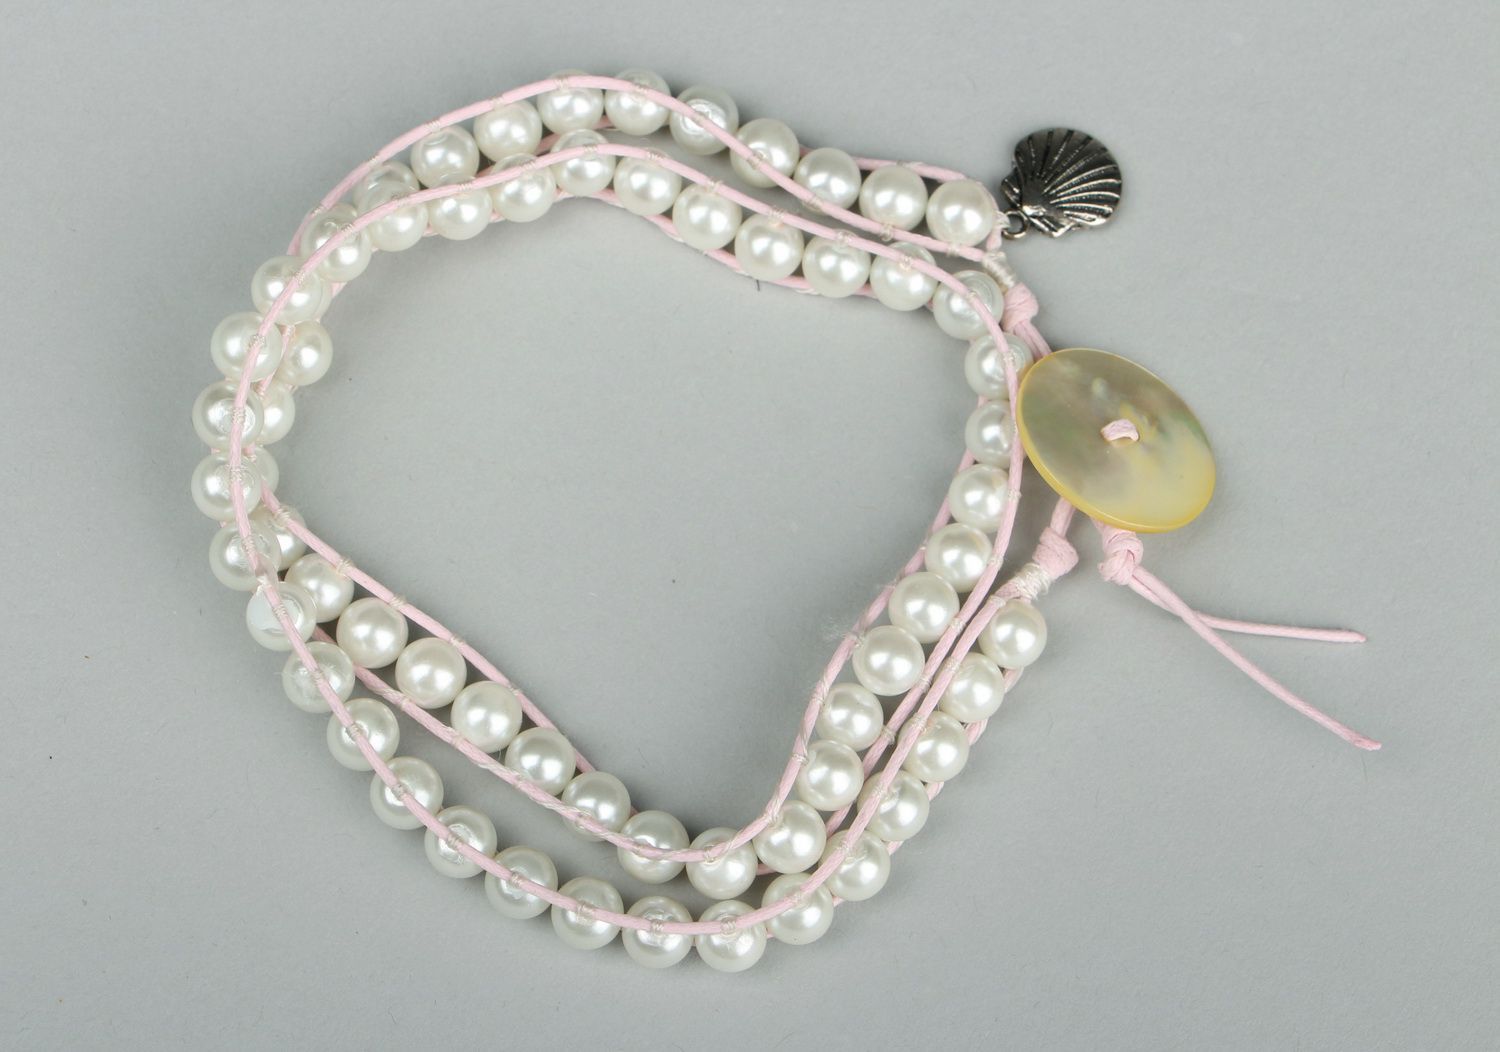 Bracelet made from ceramic pearls photo 3